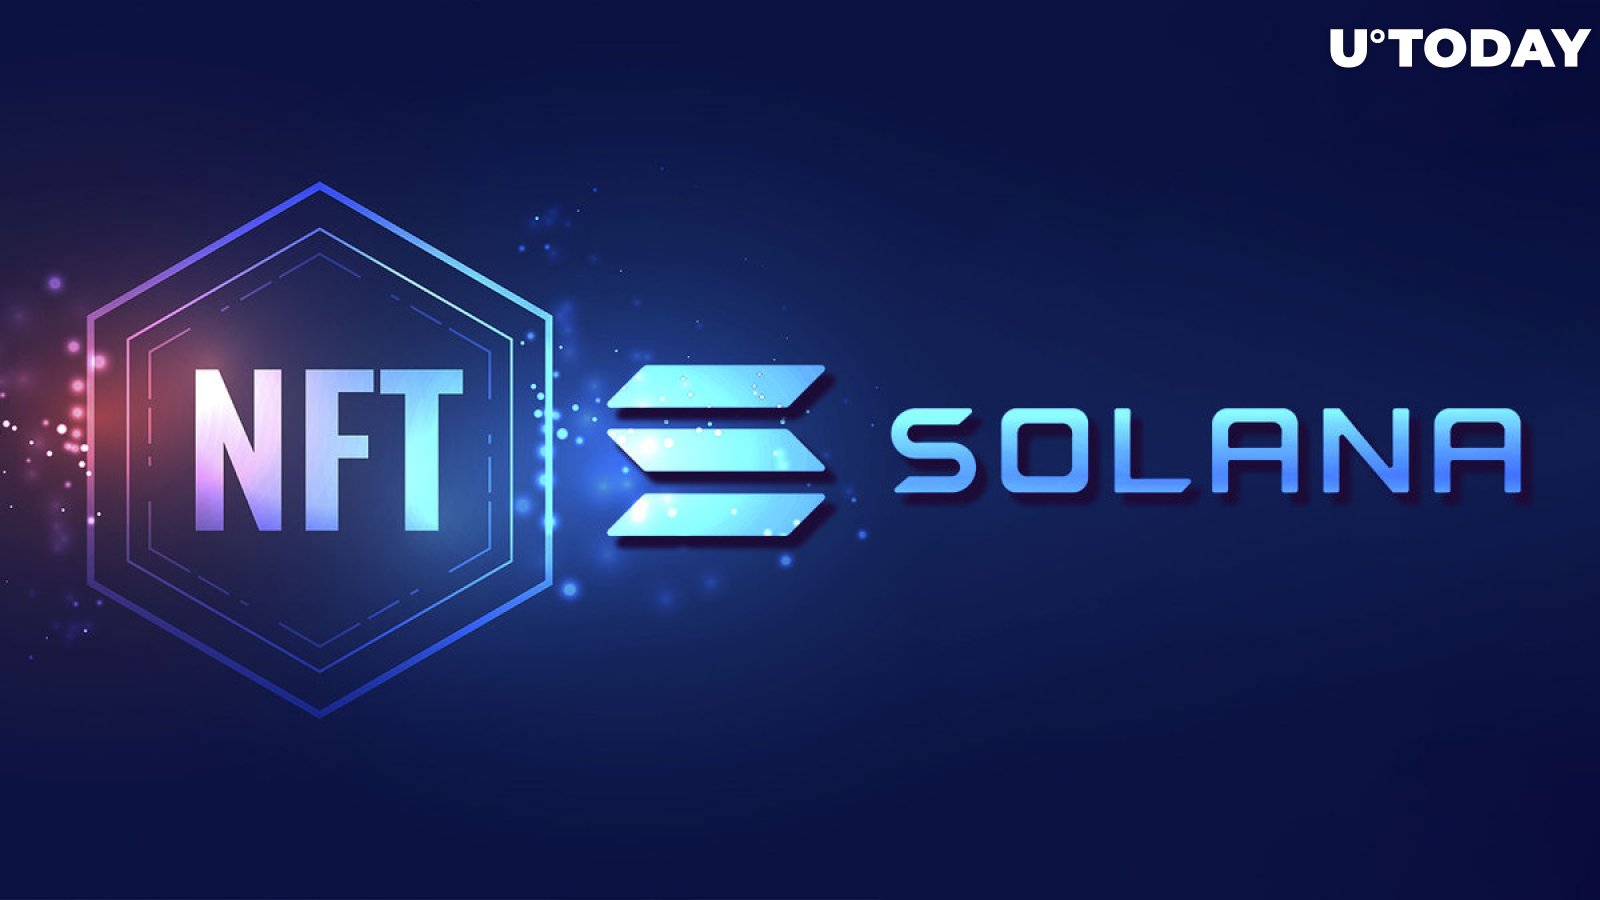 Solana (SOL) NFT Sales Surging Following Recovery of Market, Here's What It May Lead To